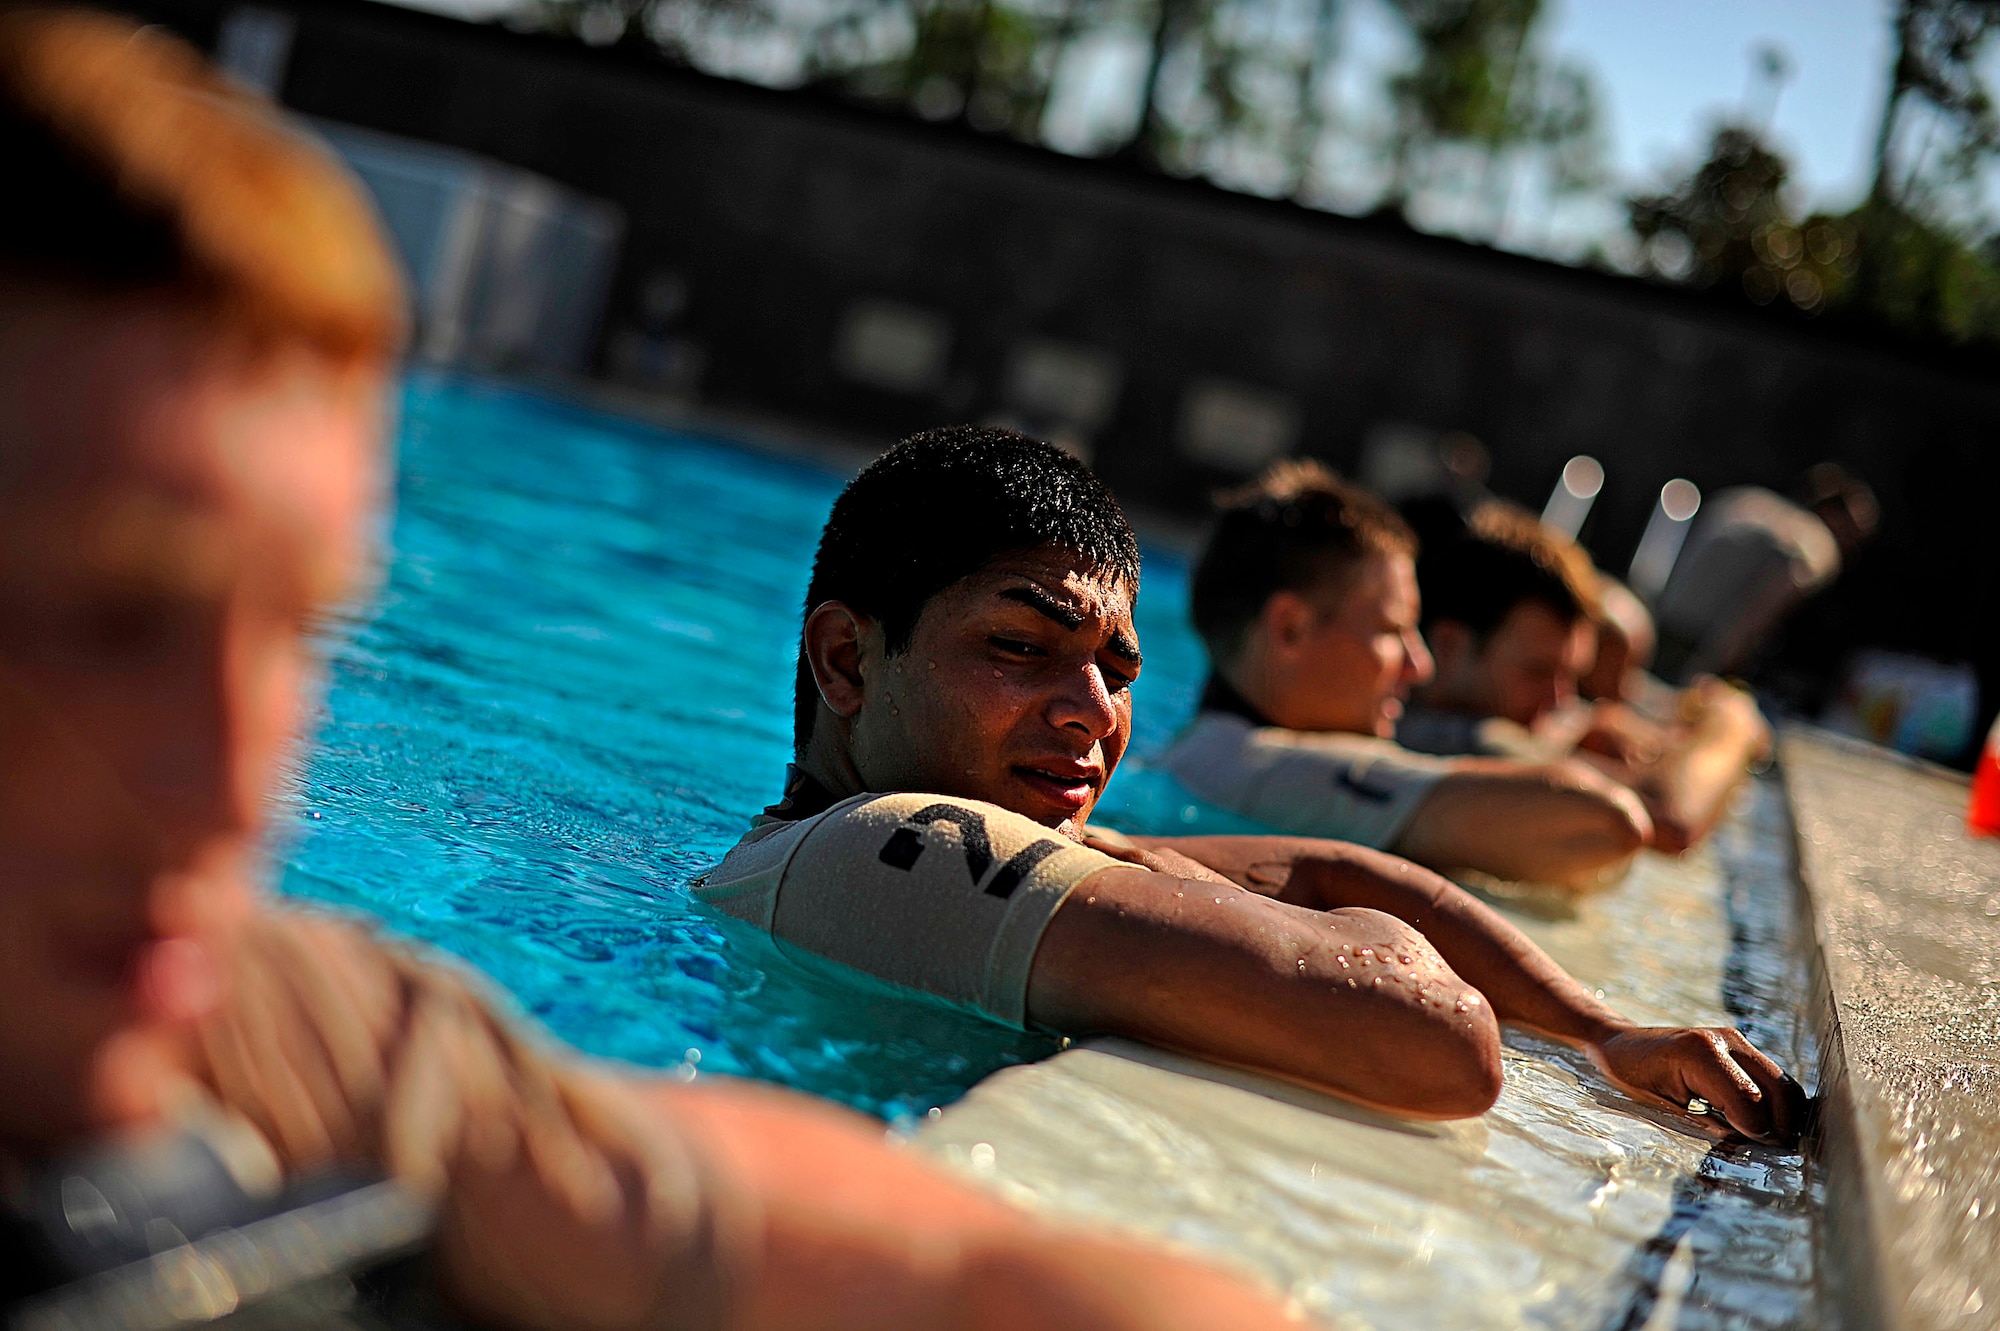 U.S. Air Force members from the Special Tactics Training Squadron, Air Force Special Operations Command, Hurlburt Field, Fla., rest on the side of the pool during pre-scuba training Sept. 21, 2010. (U.S. Air Force Photo by Master Sgt. Russell E Cooley IV/Released)